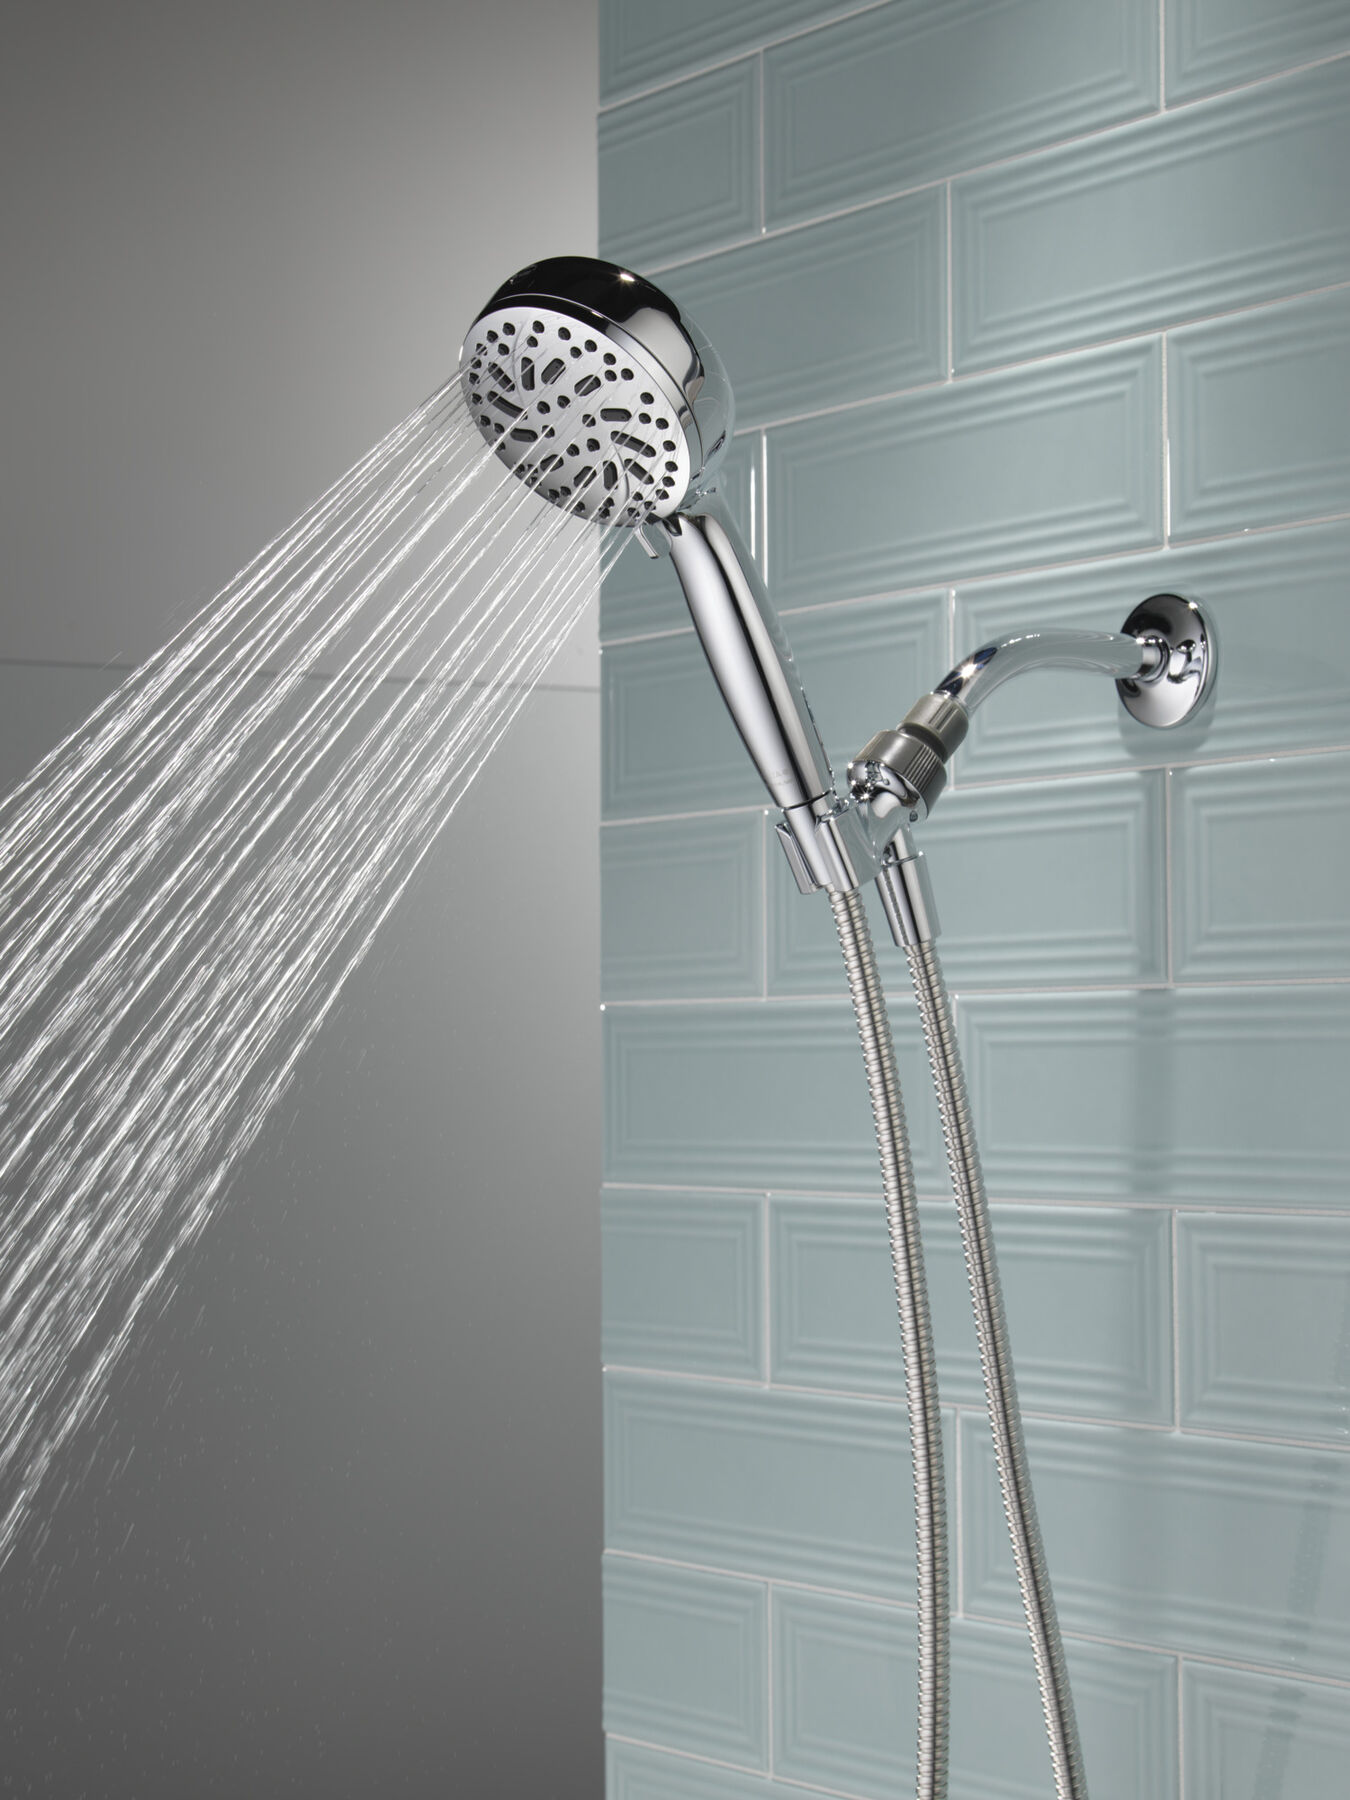 6-Setting Hand Shower with Cleaning Spray in Chrome 75740